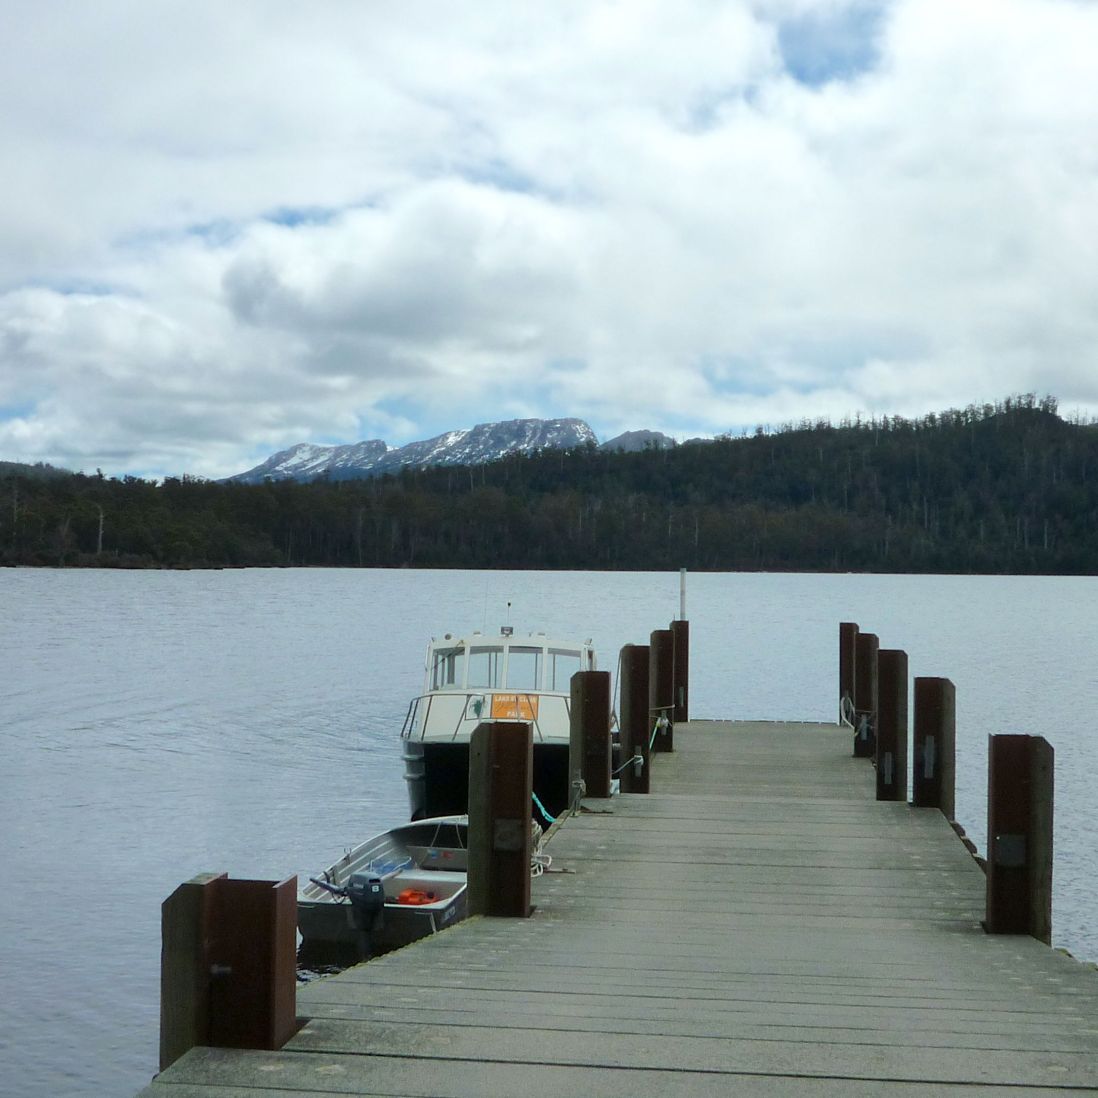 End of the Overland Track if you catch the ferry across the lake